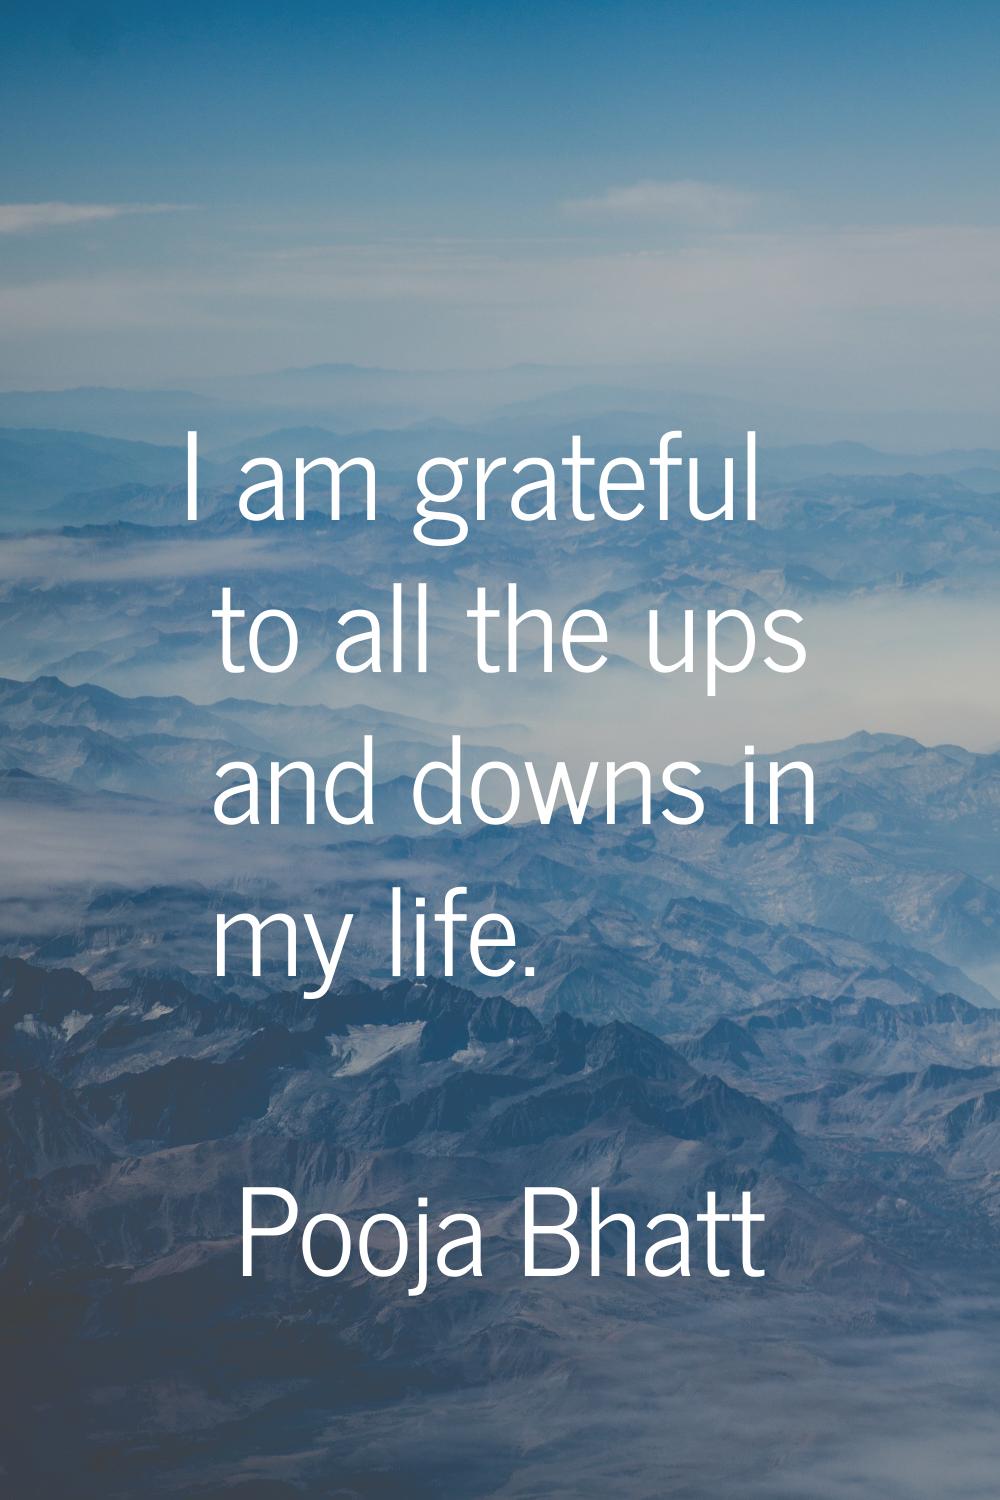 I am grateful to all the ups and downs in my life.